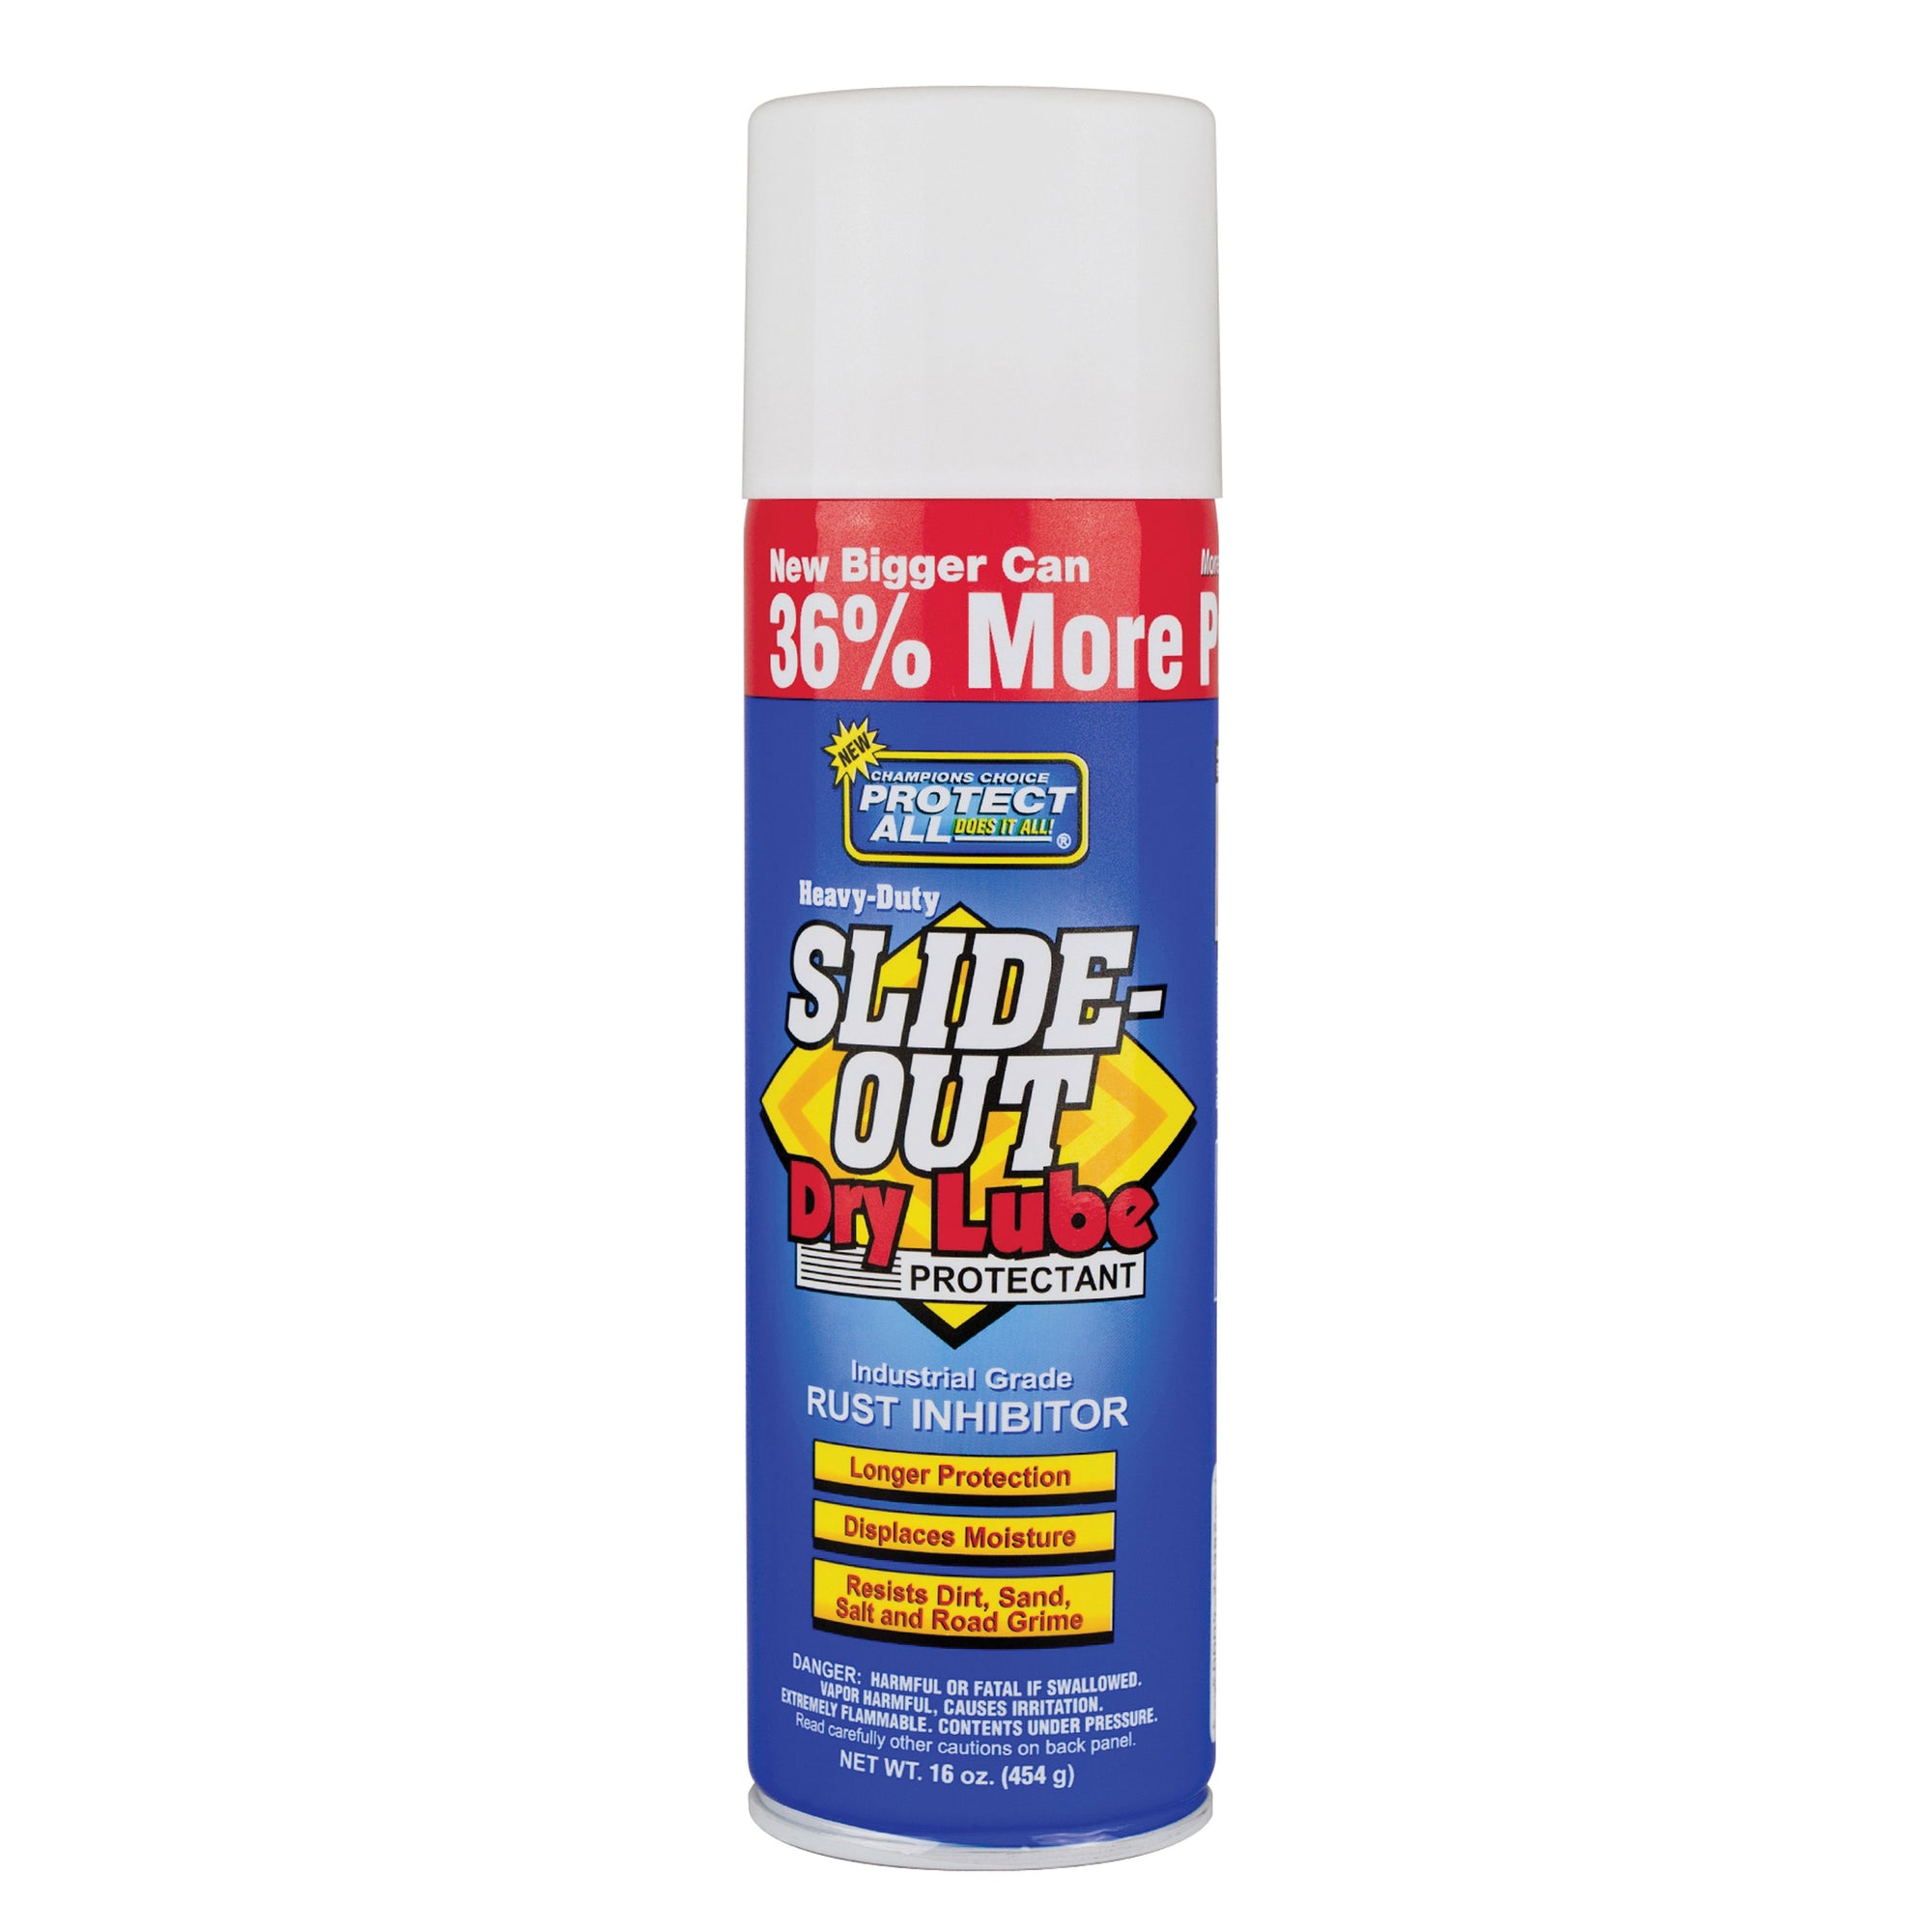 Thetford 40003 Protect All Slide-Out Dry Lube Protectant - 16 oz.